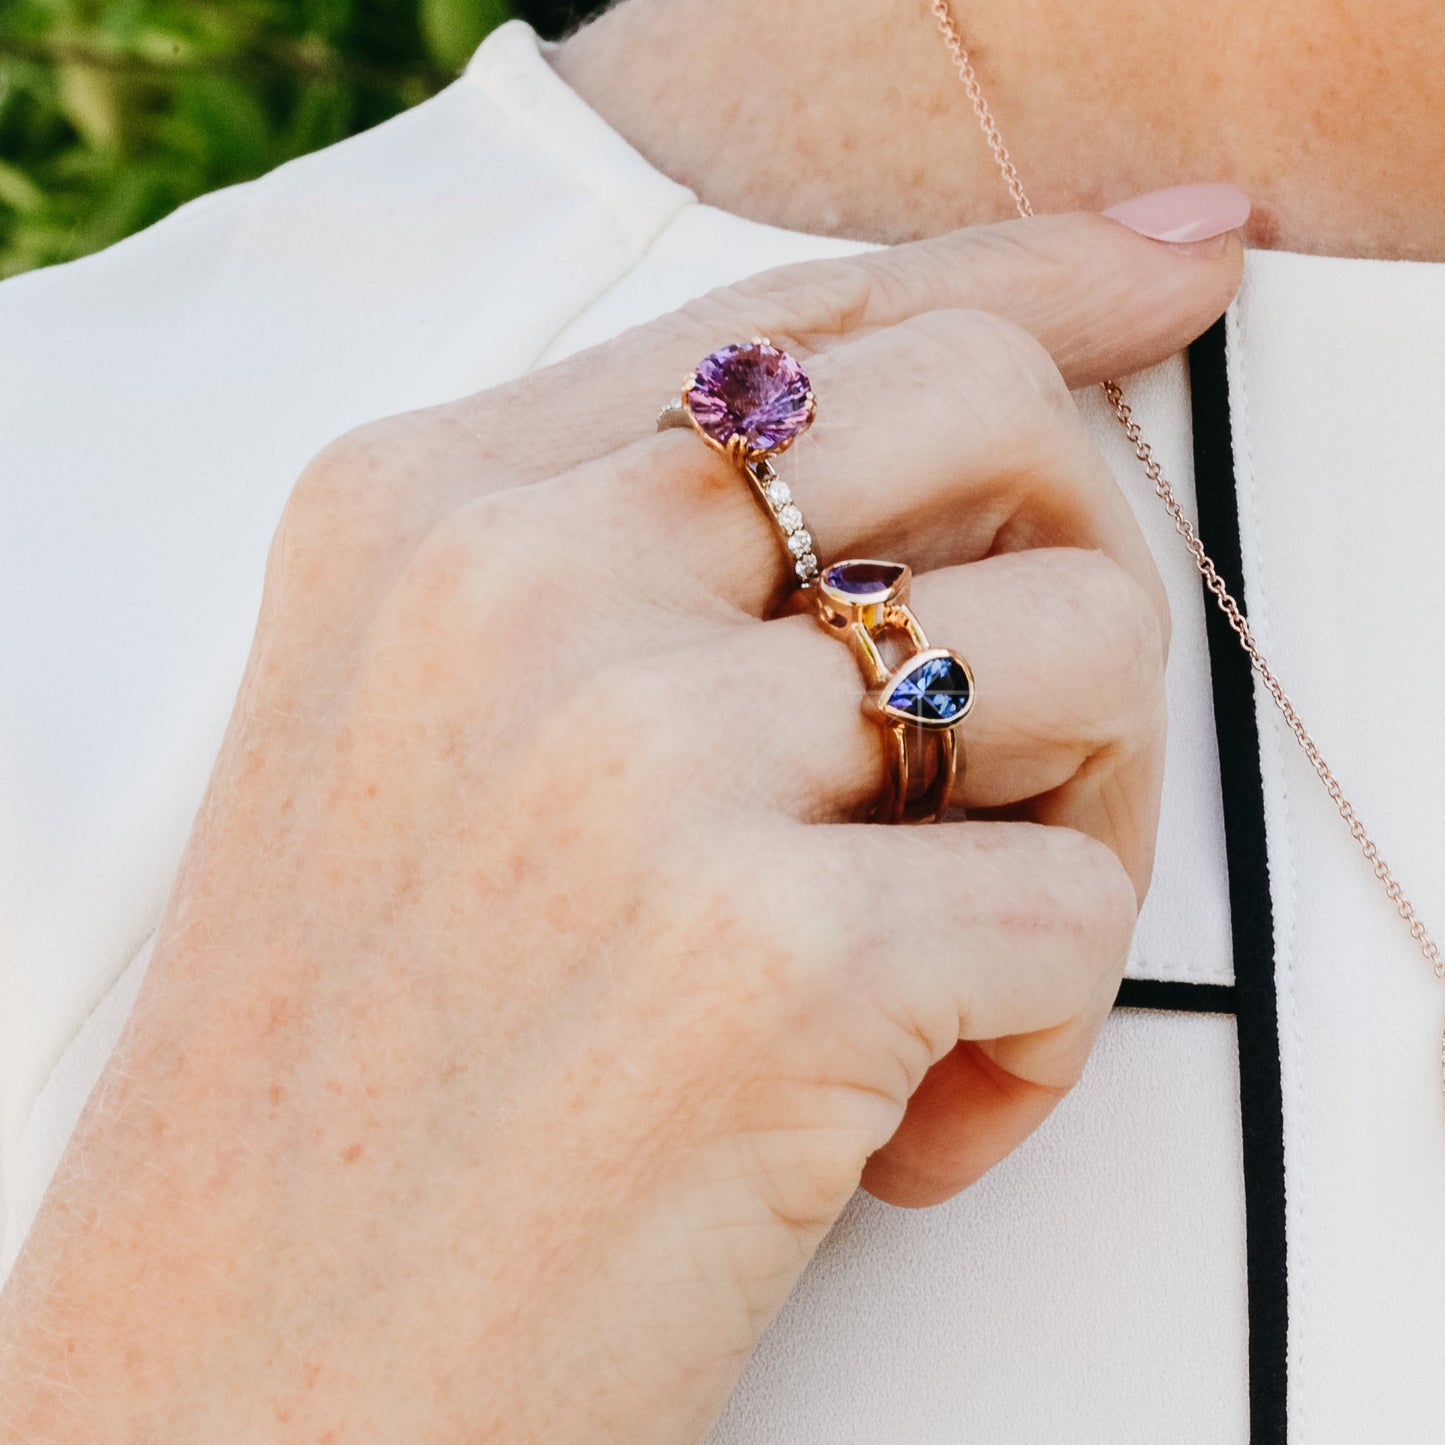 White Gold and Rose Gold Two Toned Amethyst Ring